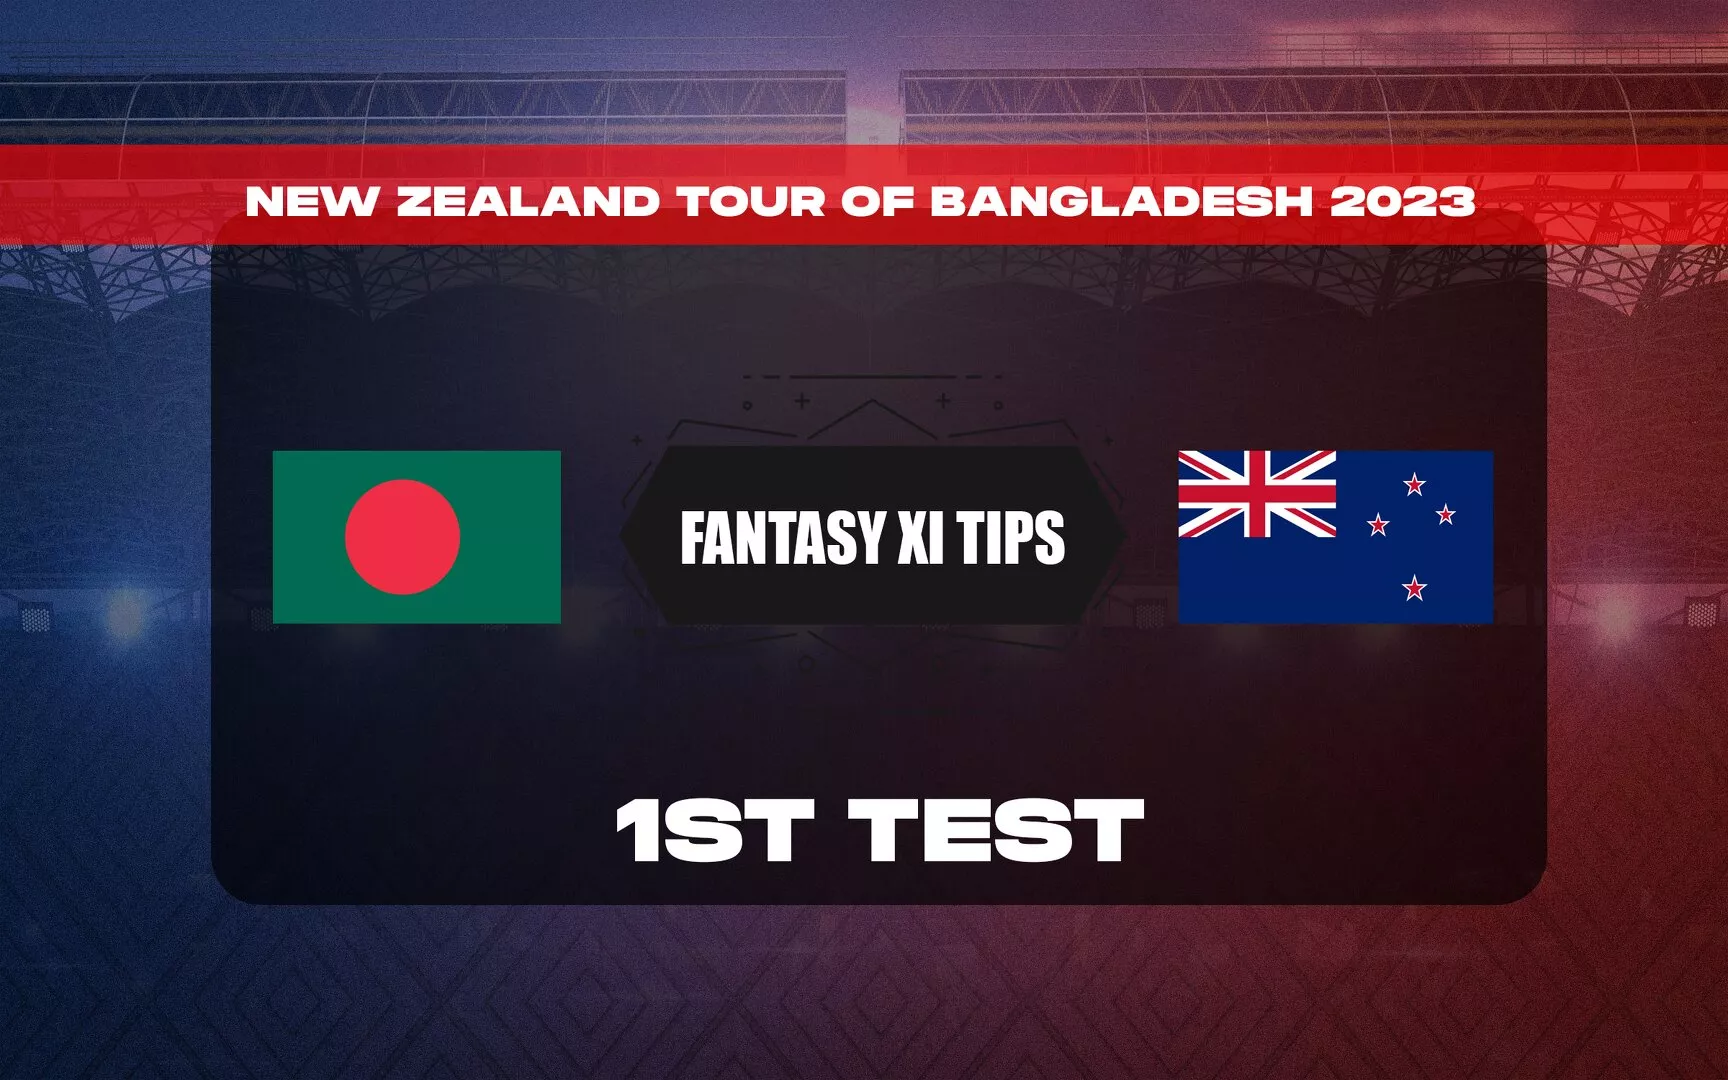 BAN vs NZ Dream11 Prediction, Dream11 Playing XI, Today 1st Test, New Zealand tour of Bangladesh 2023